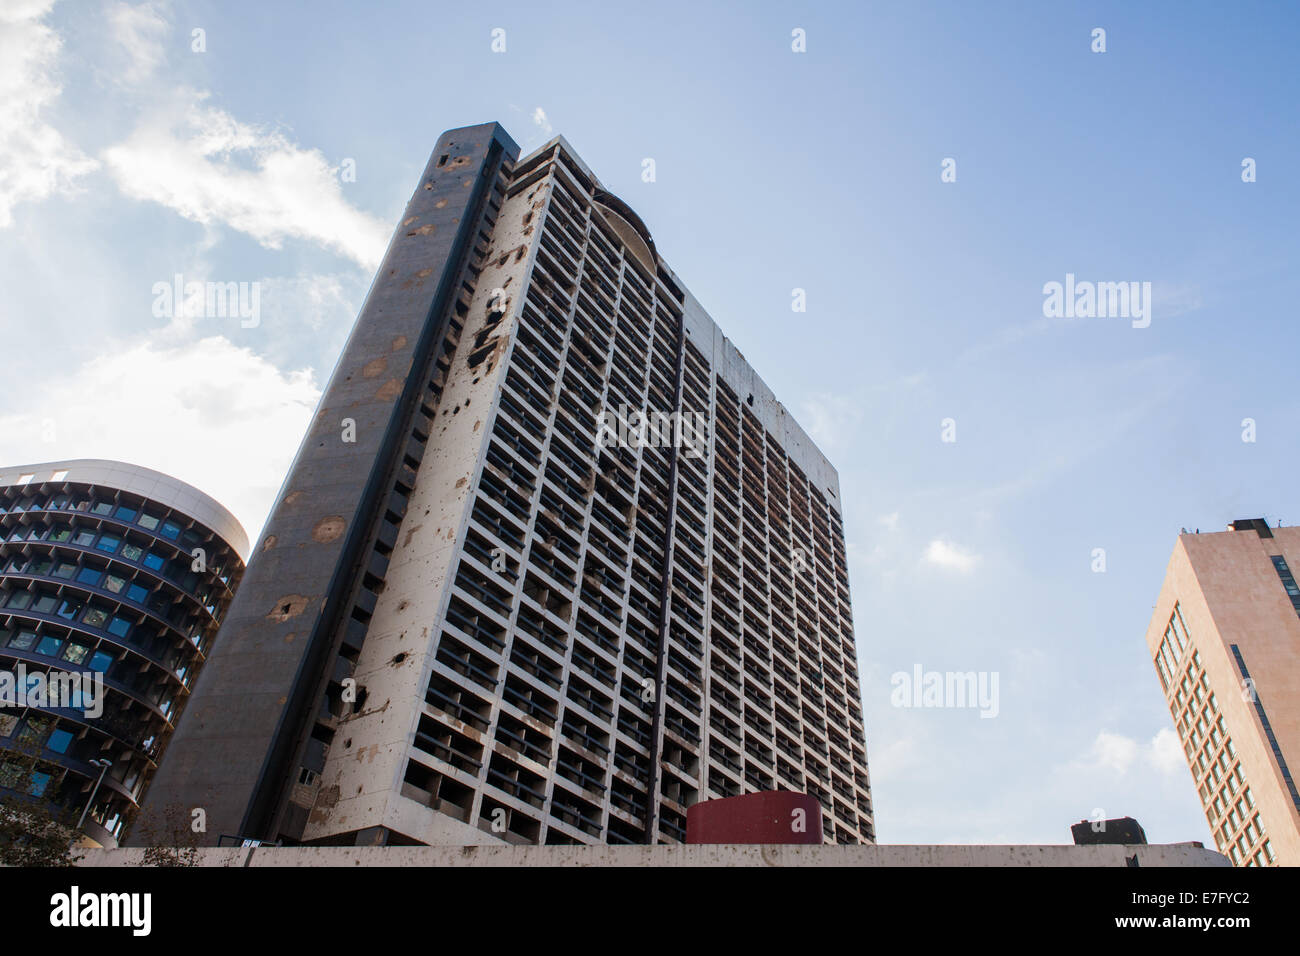 High-rise building that was badly damaged and burned out during the Lebanese civil war, in Beirut Central District (Downtown). Stock Photo